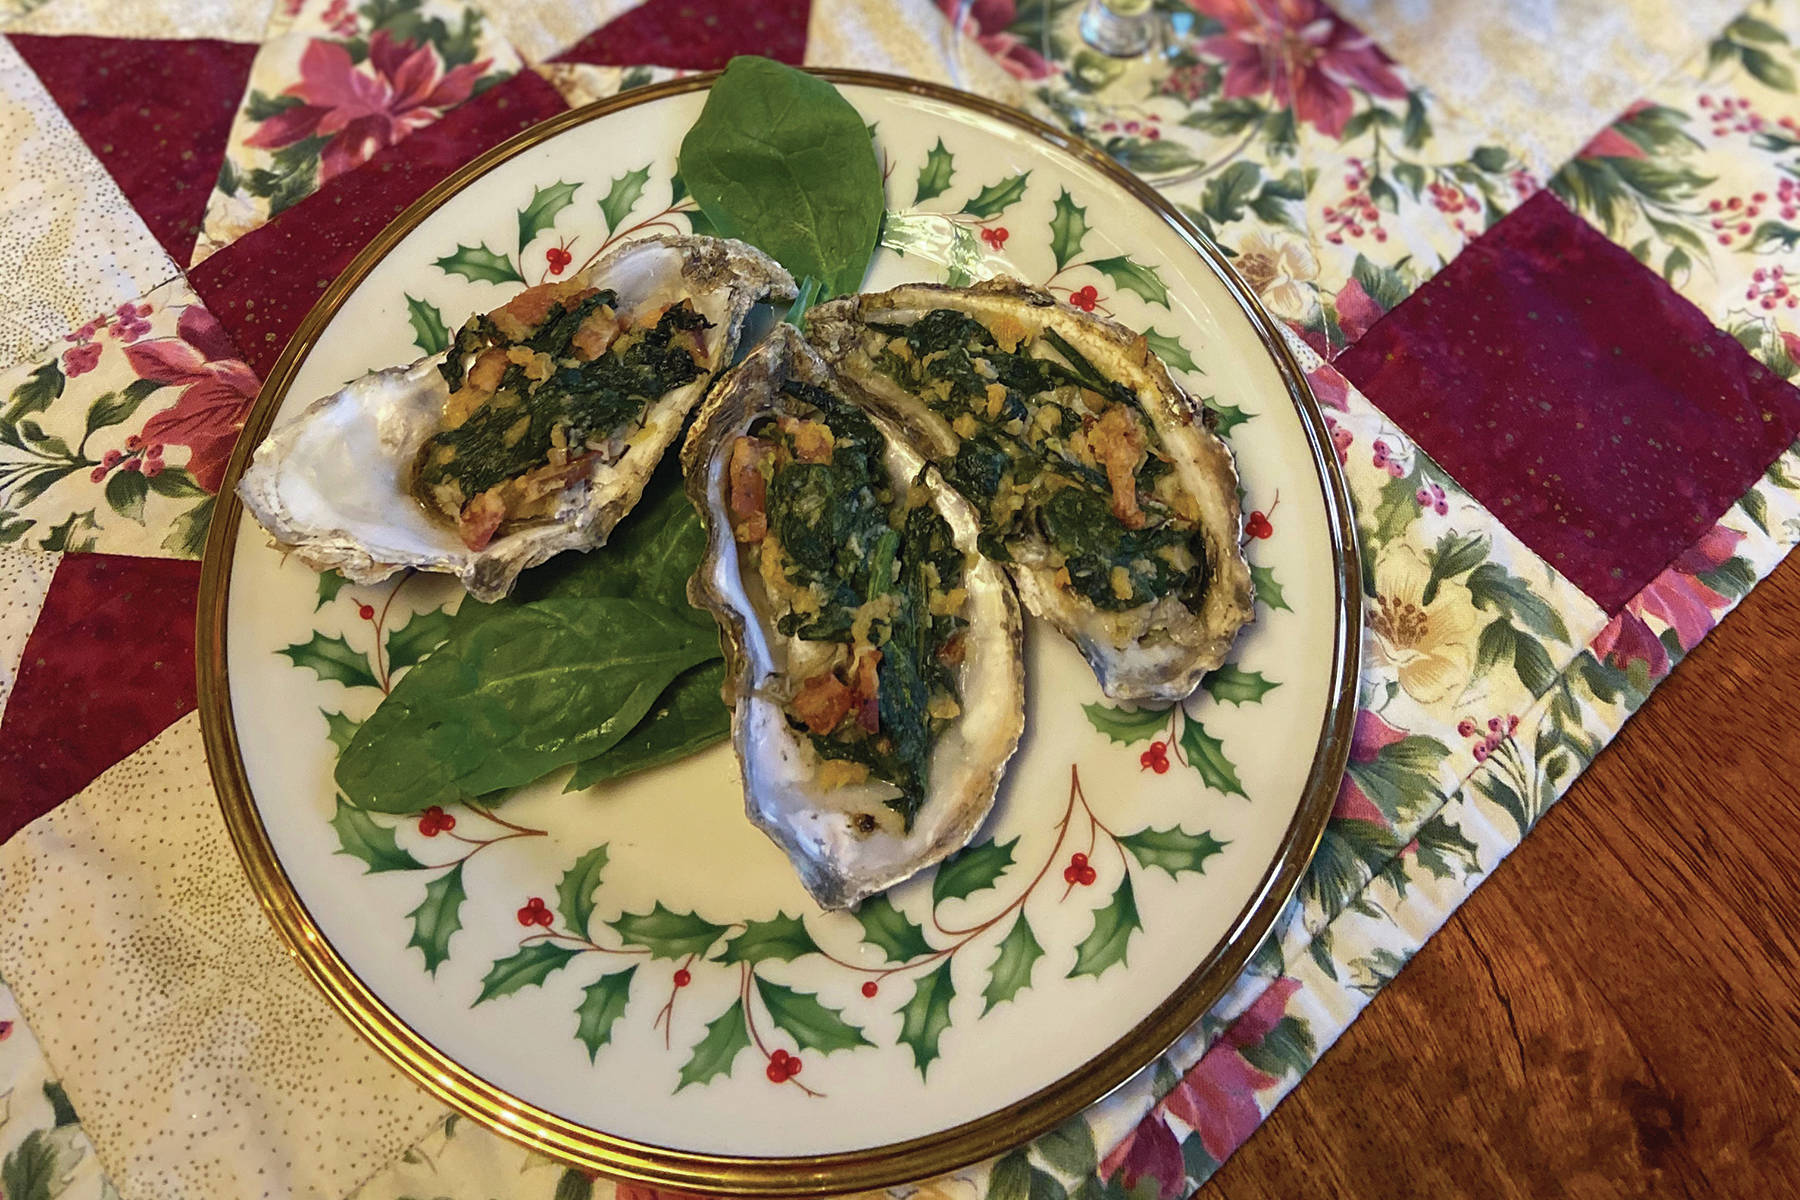 Kachemak Cuisine: Make tasty oyster dishes with fresh, local seafood